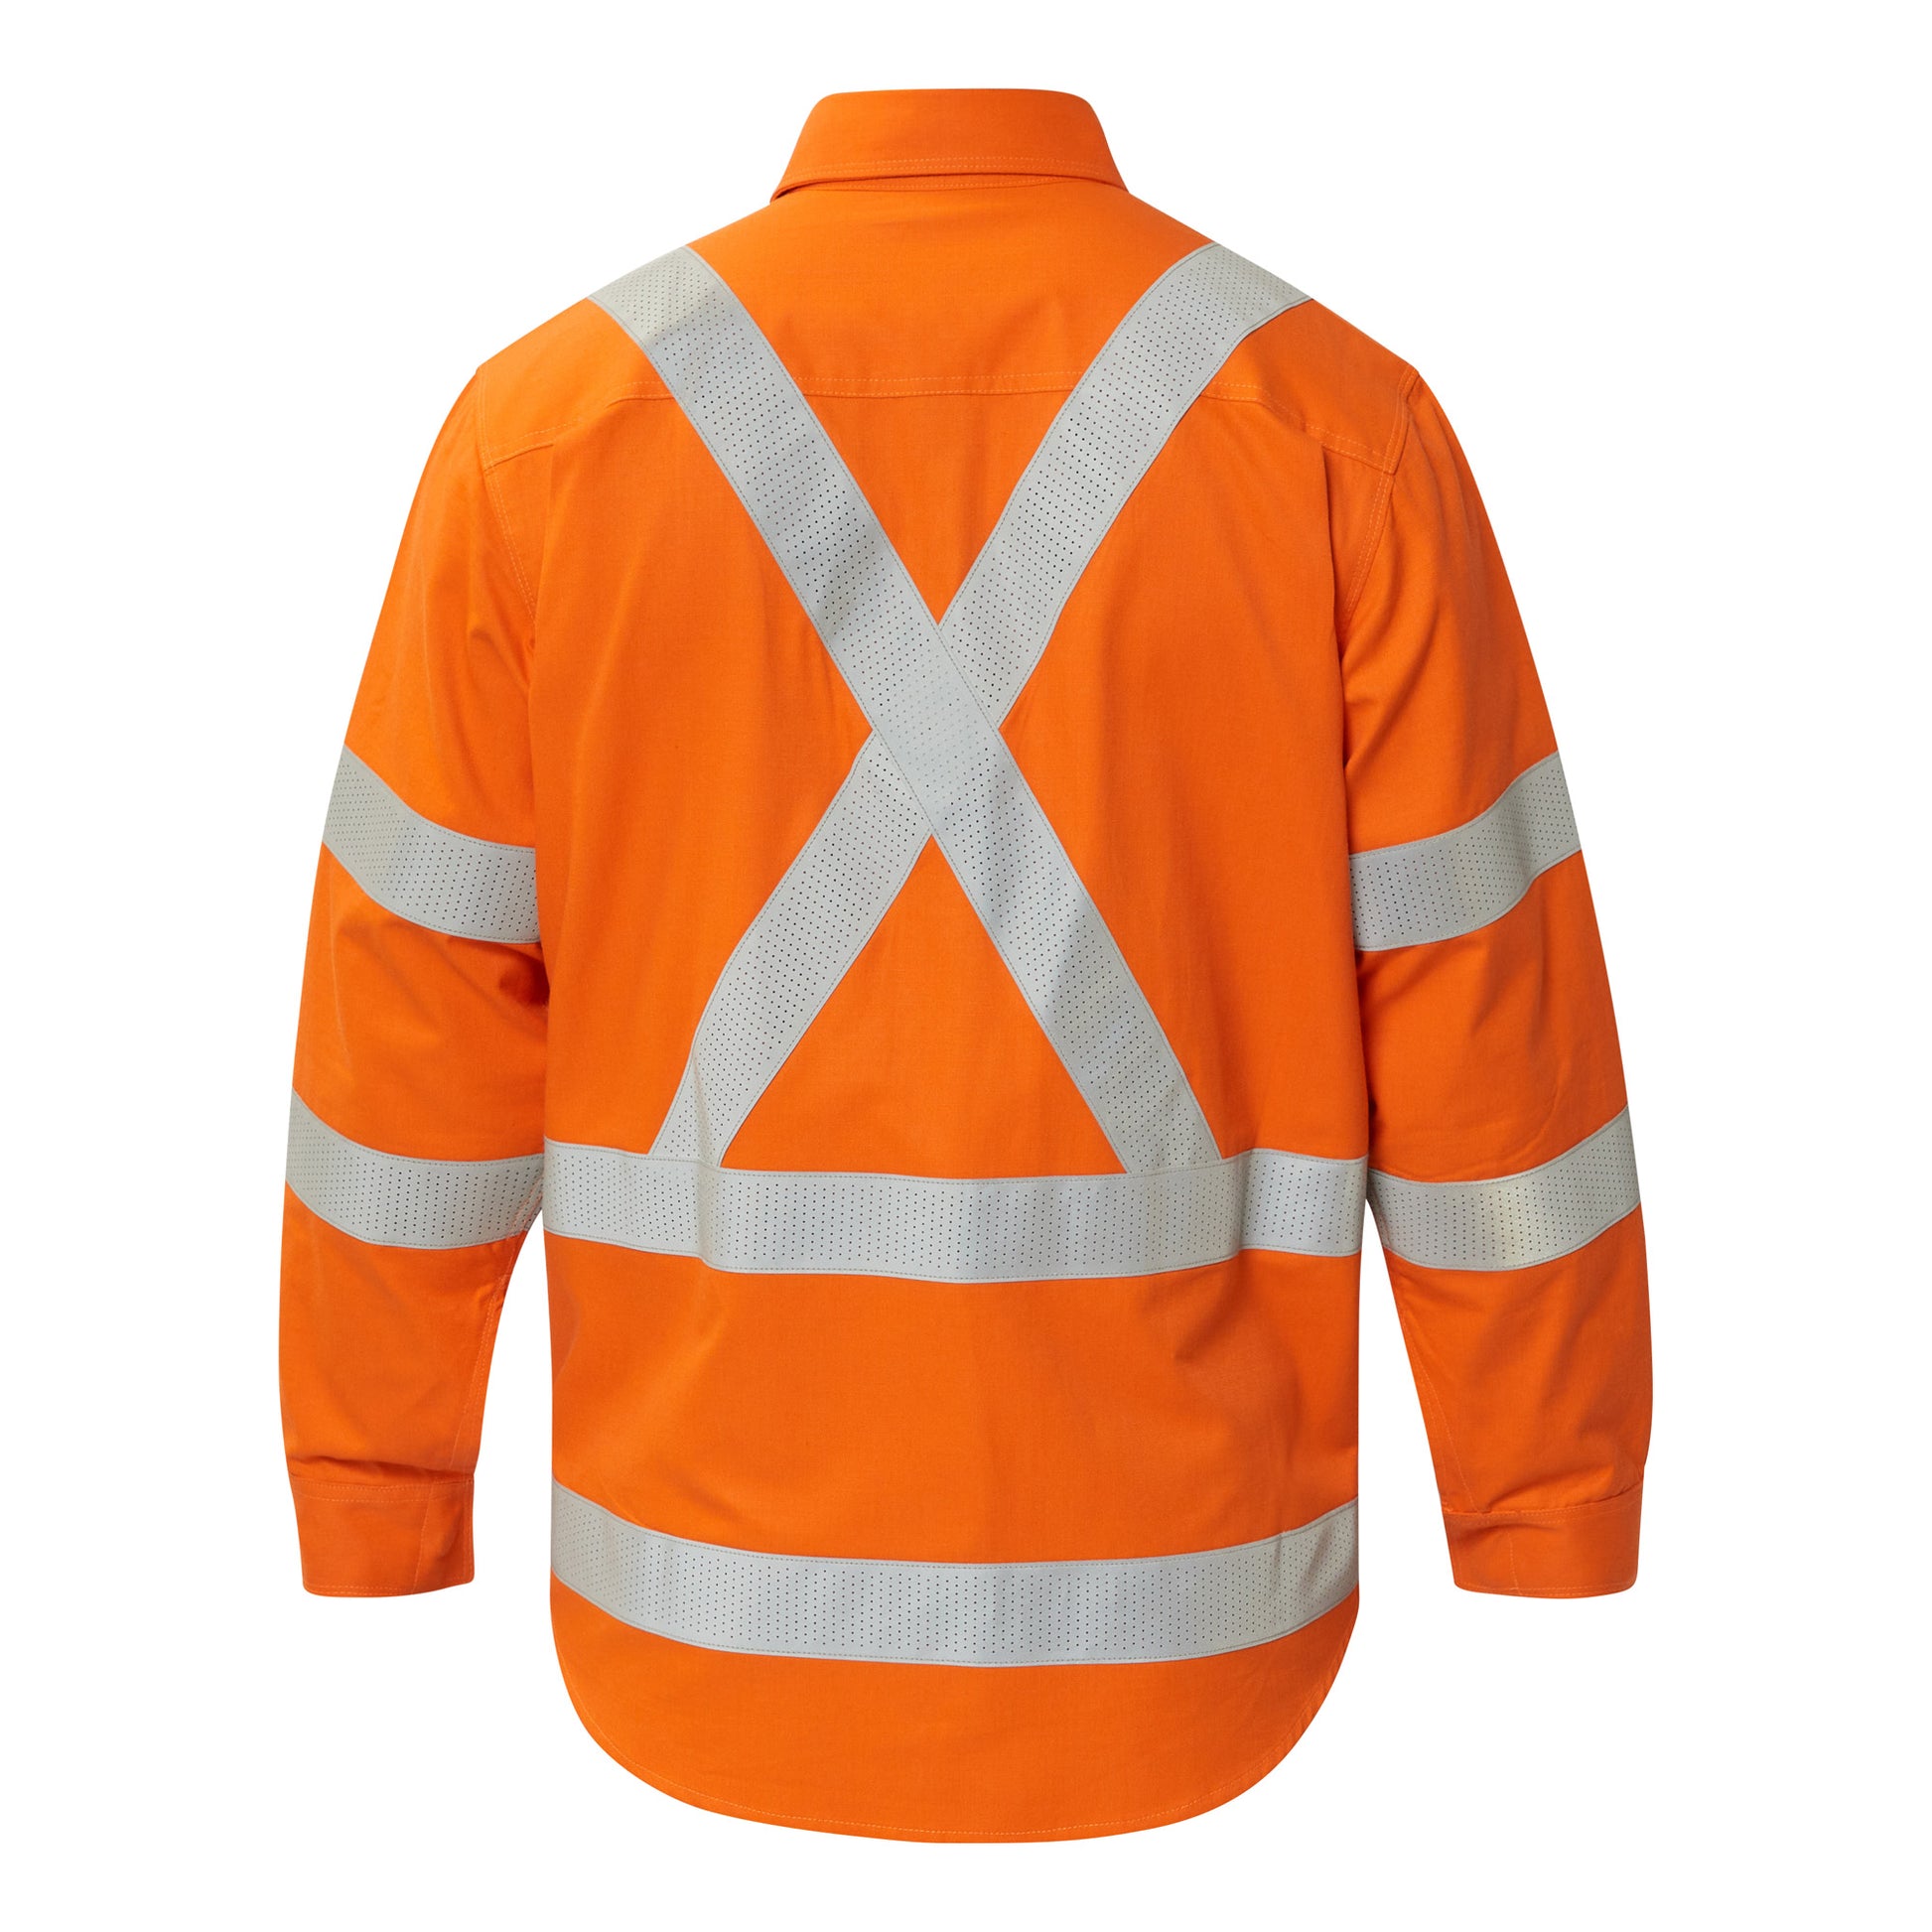 Torrent Hrc2 Mens Hi Vis Nsw Rail O/front Shirt With Xpattern Fr Reflective Tape - made by FlameBuster